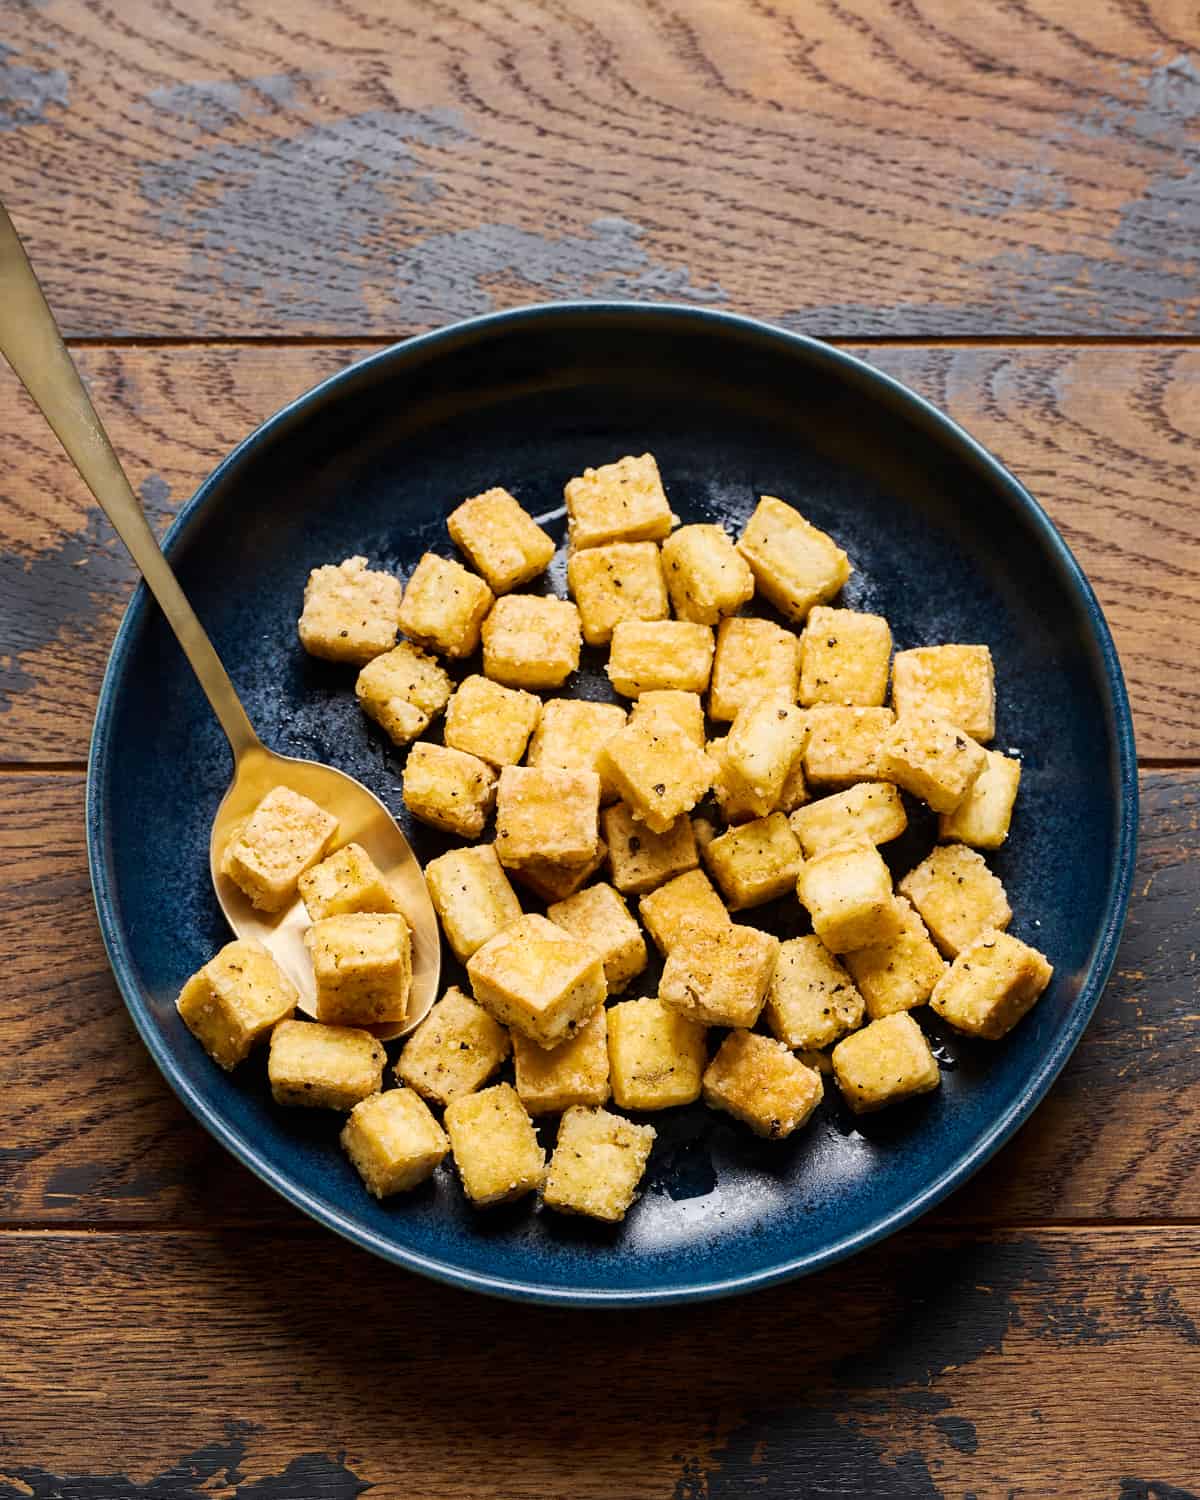 Fried tofu in a bowl on a wooden table.